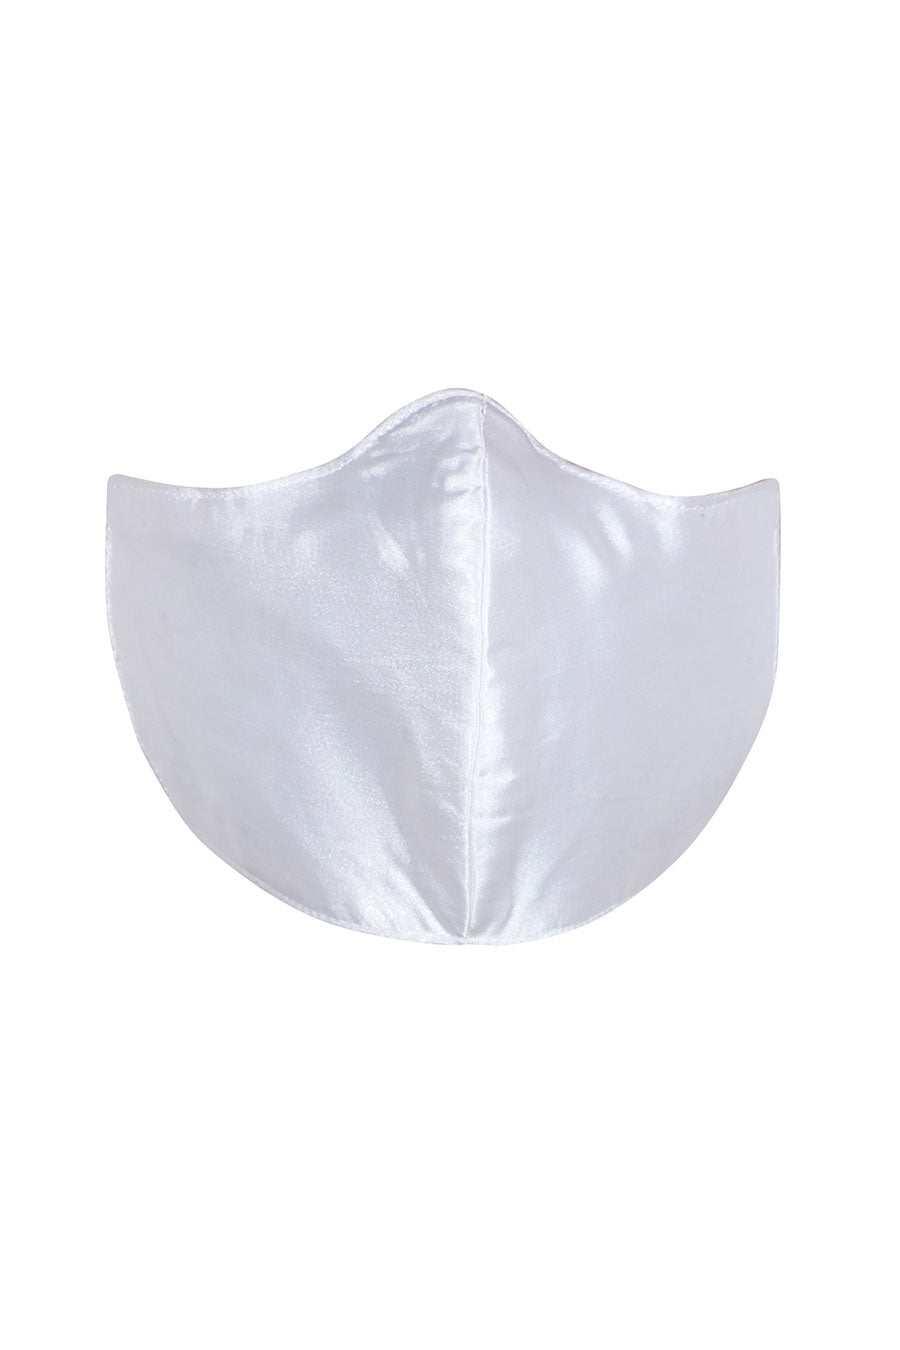 White 3 Ply Mask With Additional Mask